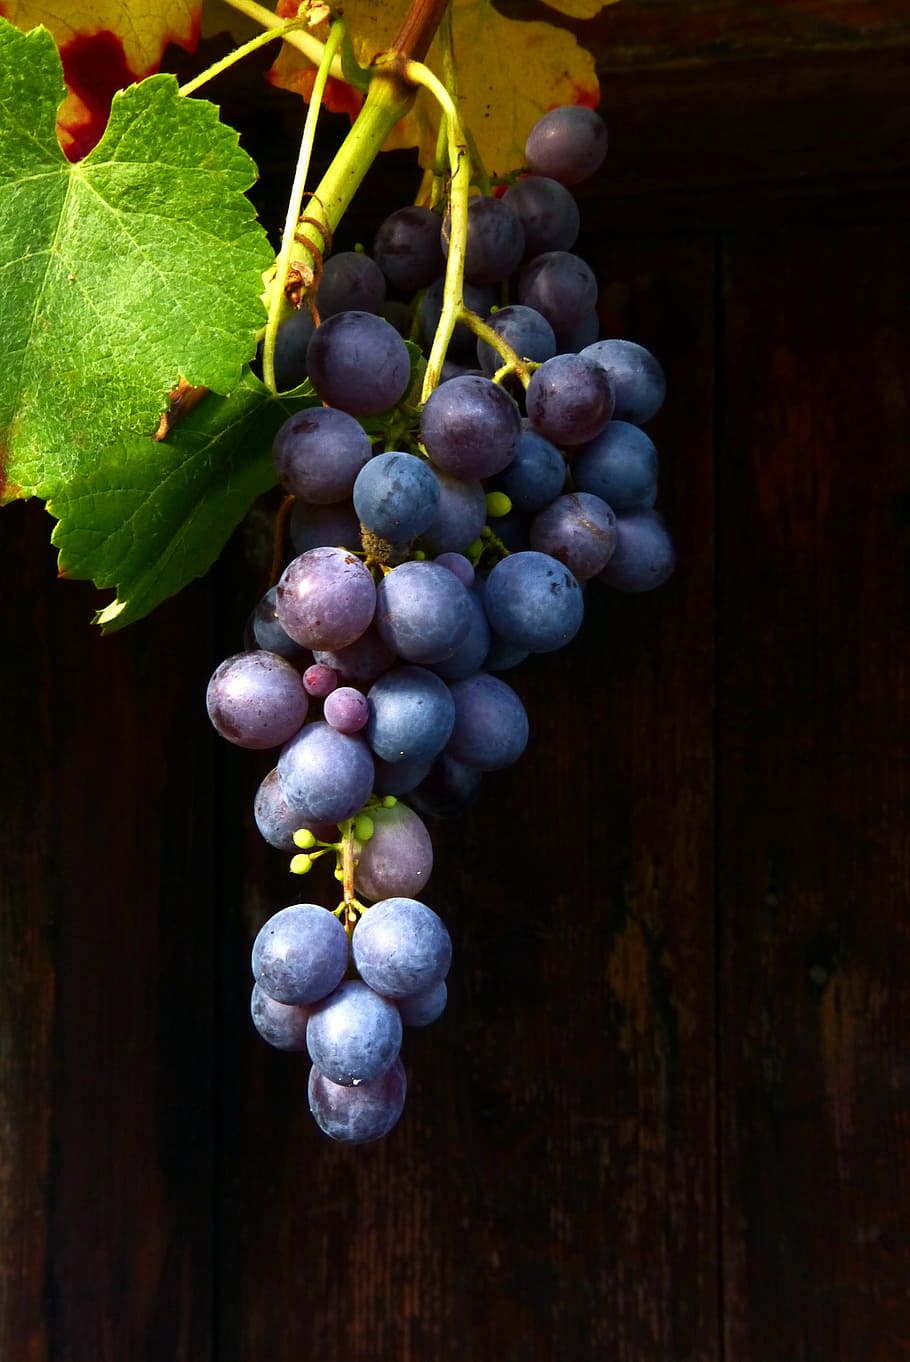 grapes, hanging, wooden, surface, wine, red wine, blue grape, muscat bleu, blue, healthy eating